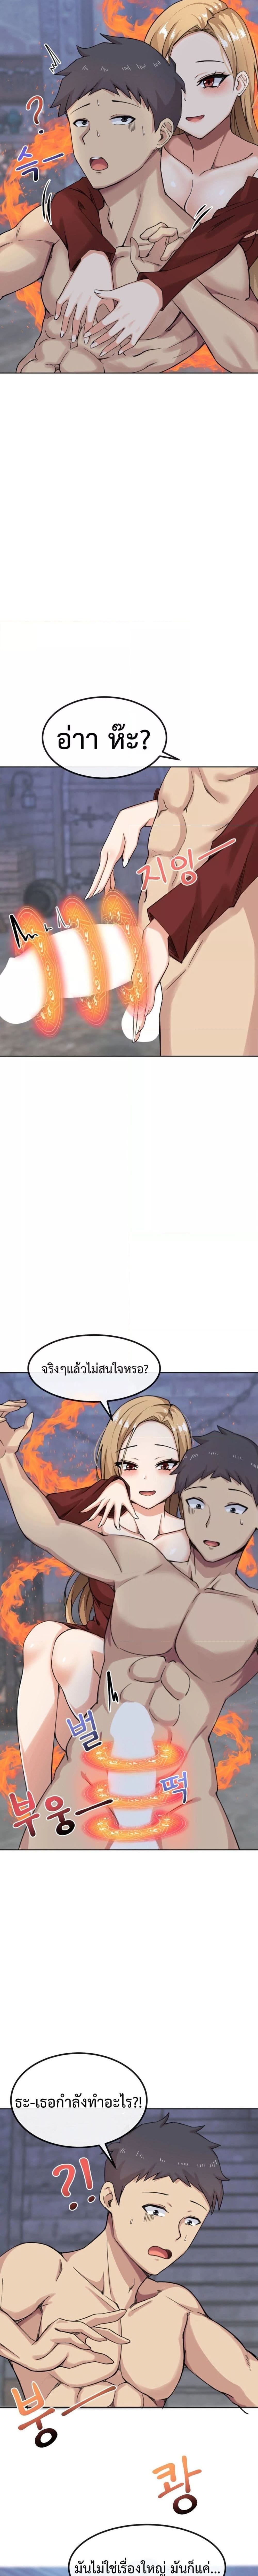 Meat Doll Workshop in Another World ตอนที่ 2 ภาพ 9